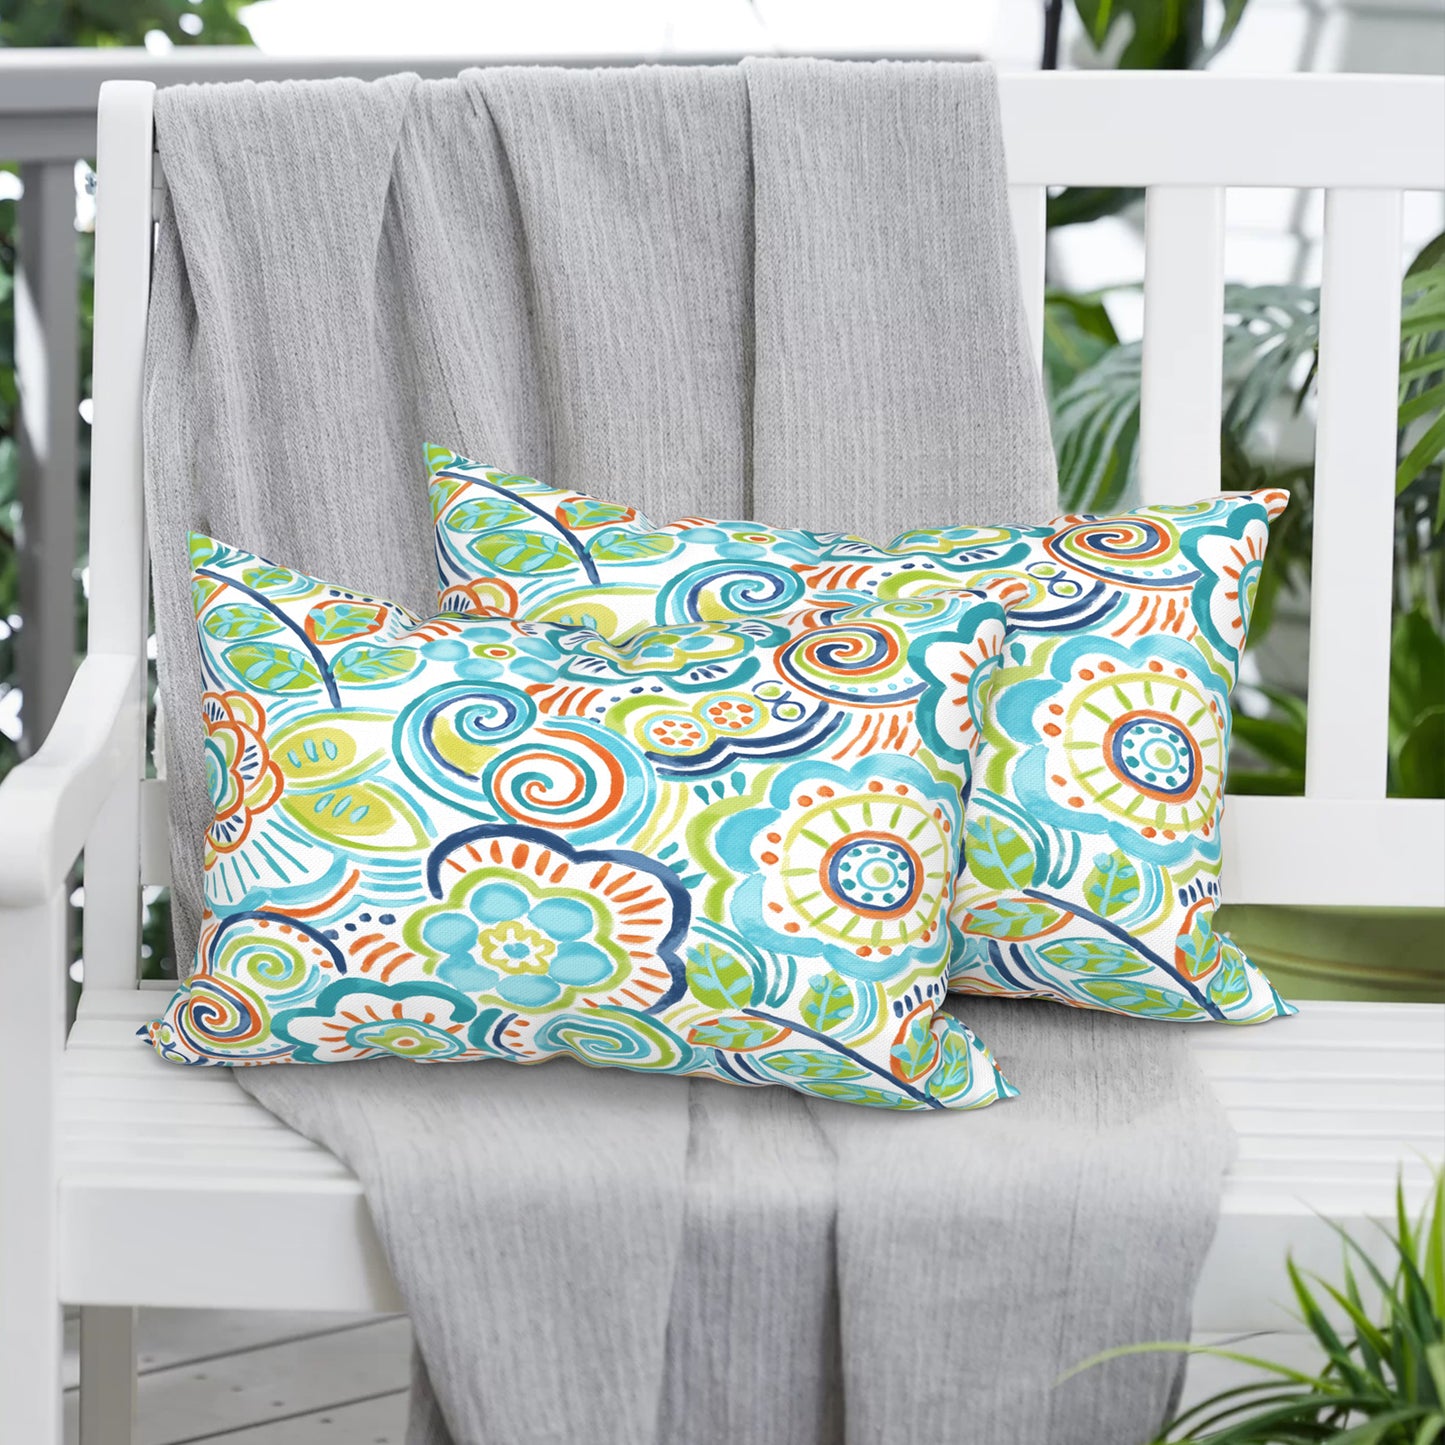 Melody Elephant Pack of 2 Outdoor Lumbar Pillow Covers, All Weather Cushion Pillow Cases 12x20 Inch, Pillowcase for Patio Couch Decoration, Flower Blue